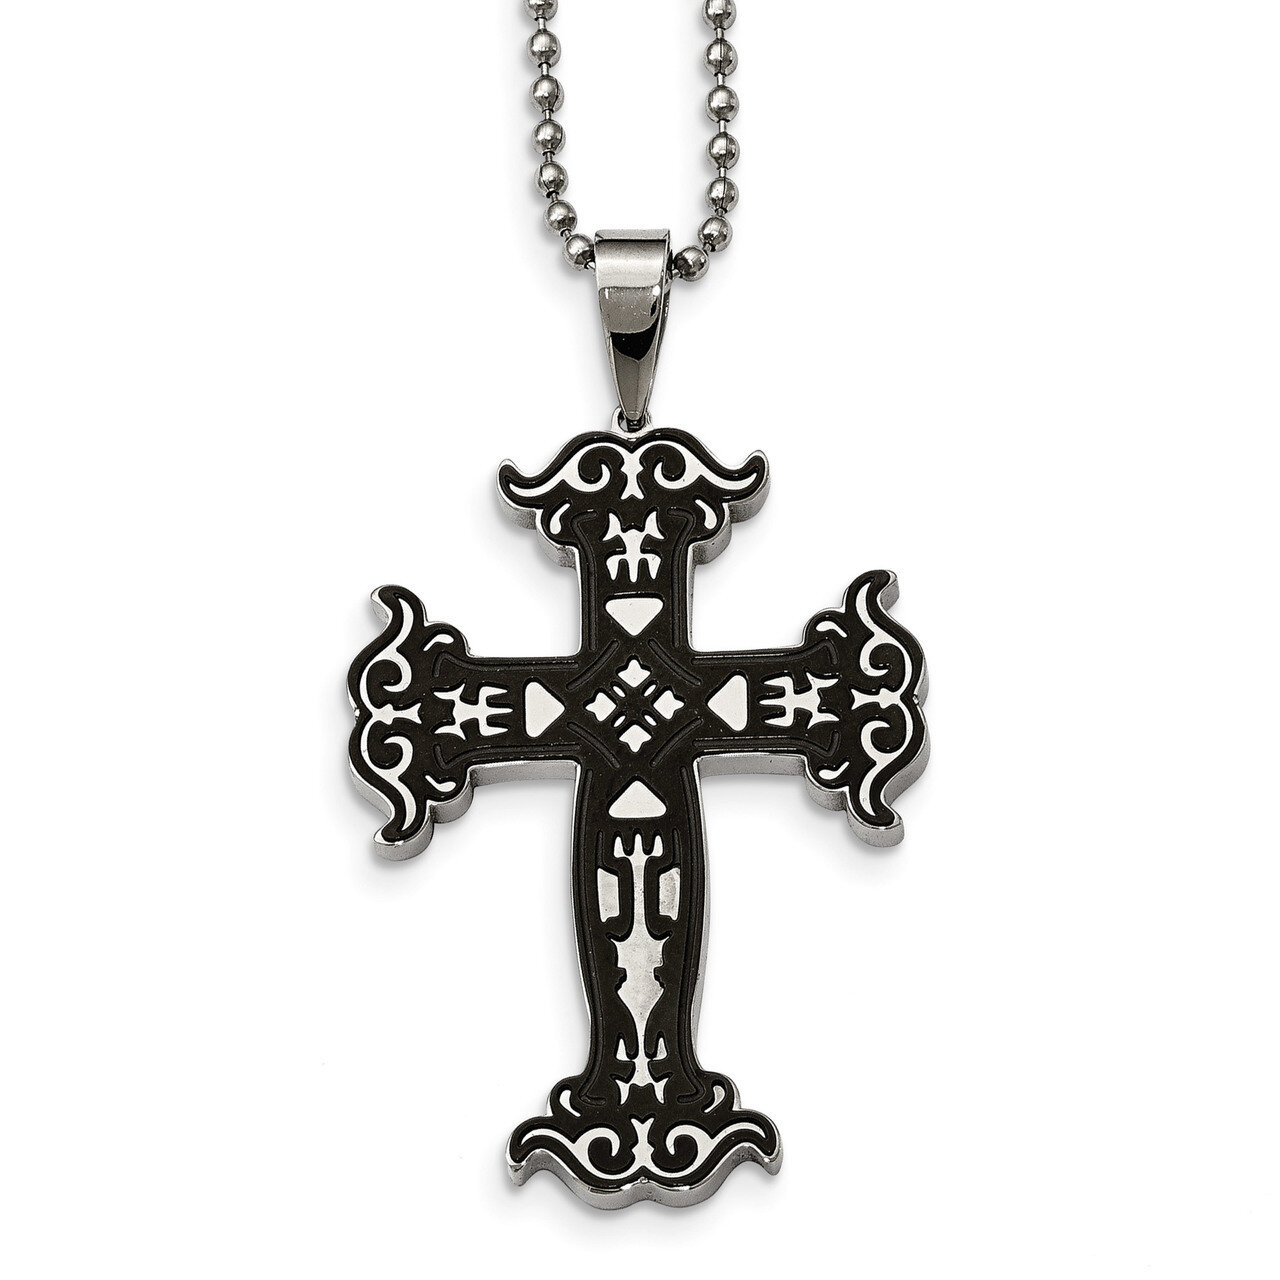 Polished Black IP Cut-out Cross Necklace Stainless Steel SRN2110-20